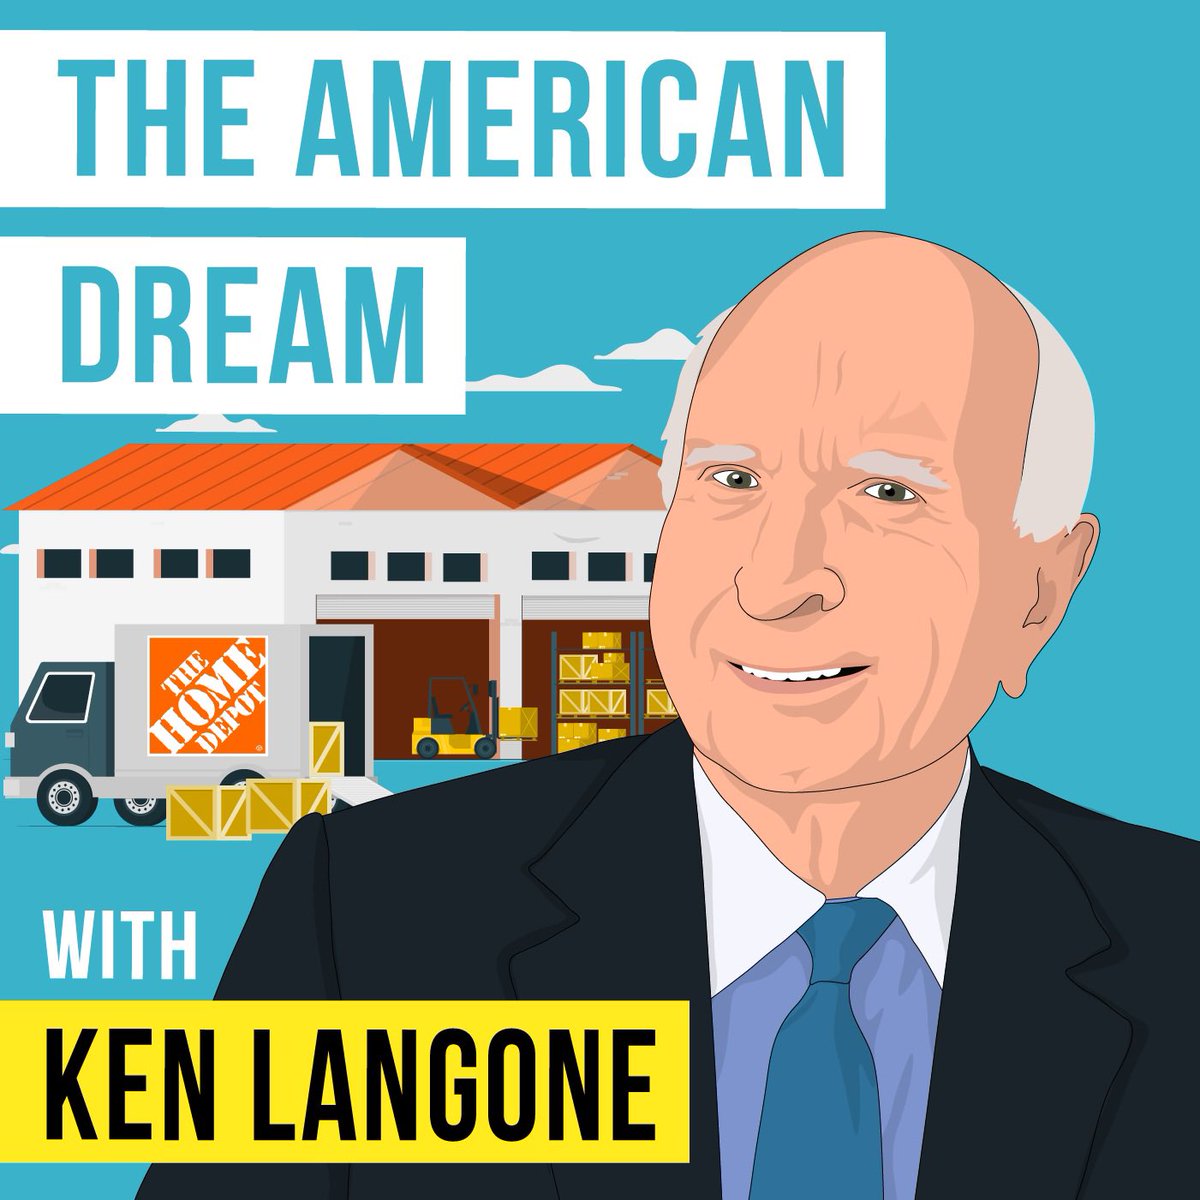 Ken Langone’s life should be a movie He co-founded Home Depot Bought and held shares for decades in others like Eli Lily Fought Spitzer (hilarious section) Rebuilt NYU Langone So much more Integrity and energy off the charts. The American Dream: joincolossus.com/episodes/32603…